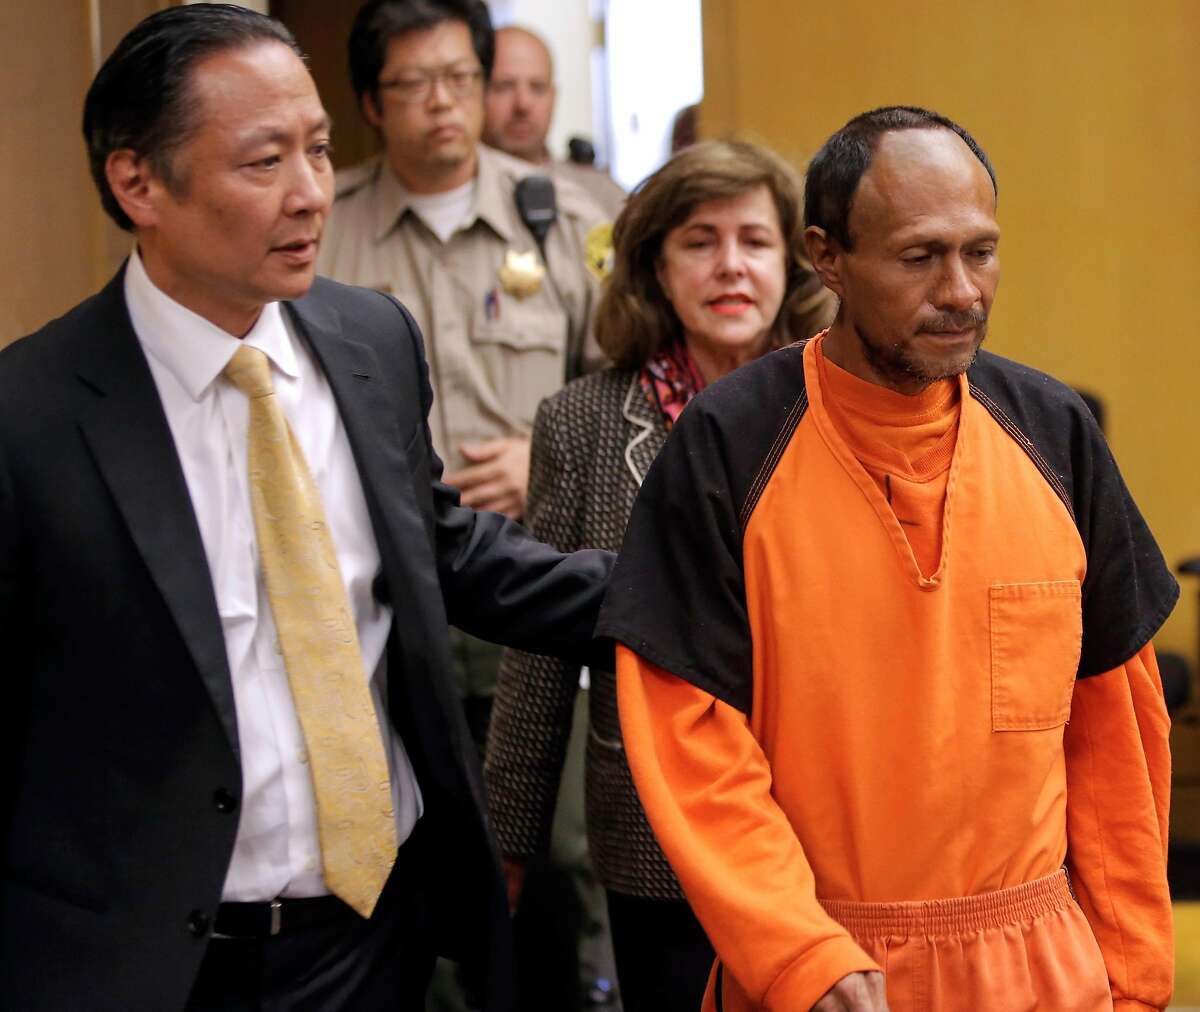 San Francisco Public Defender Jeff Adachi, (left) leads Juan Francisco Lopez-Sanchez, into the Hall of Justice in San Francisco, Calif. on Tues. July 7, 2015, for his arraignment on suspicion of murder in the shooting death of Kate Steinle on San Francisco‚Äôs Pier 14 last Wednesday.